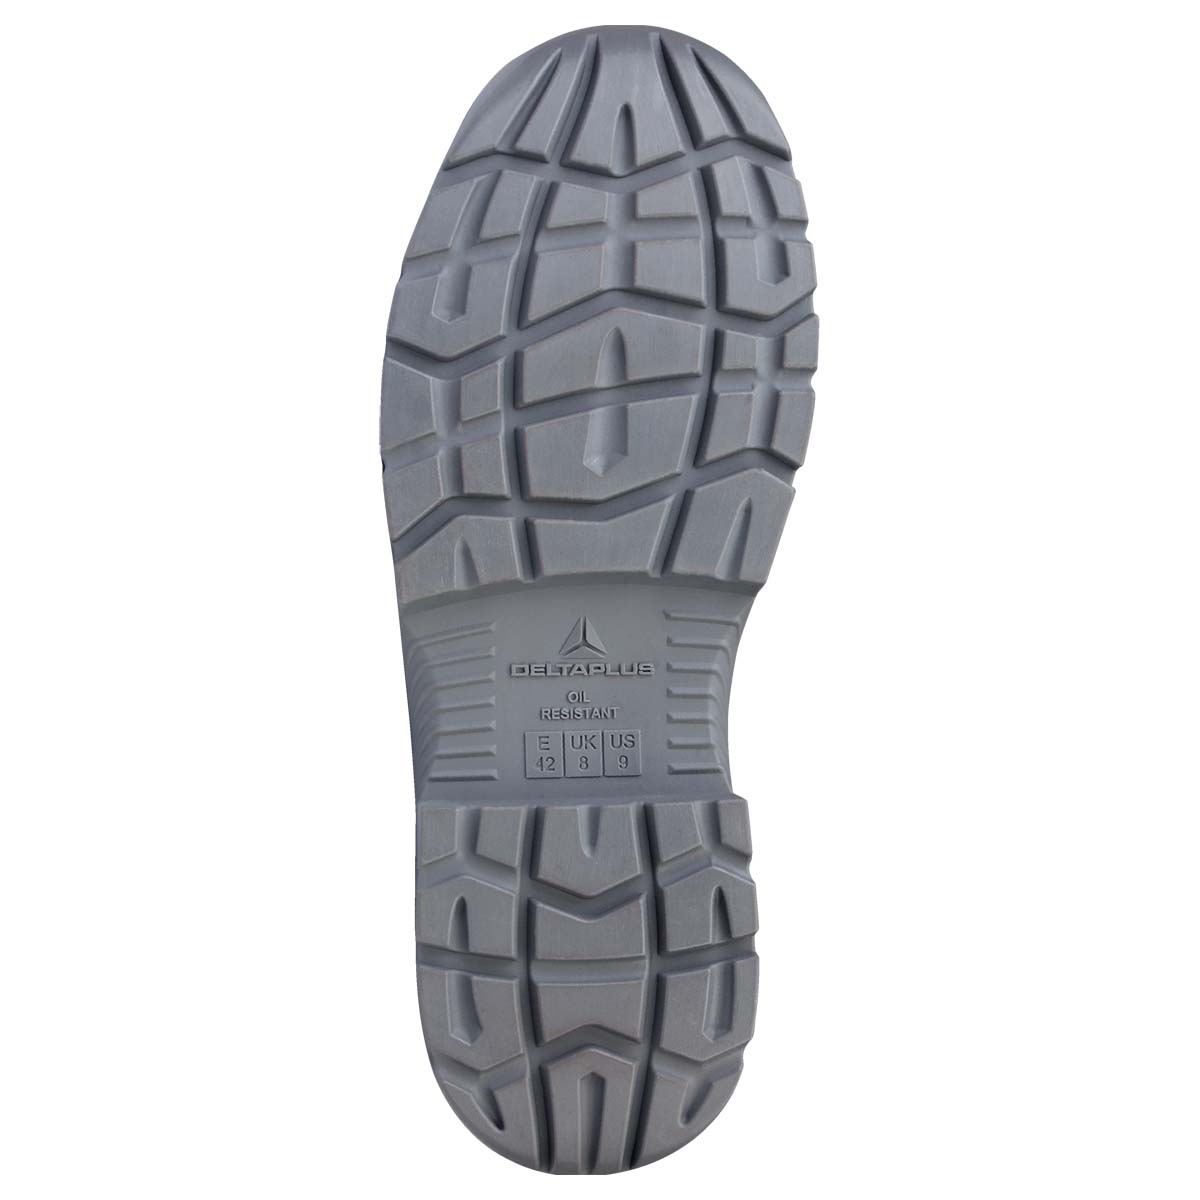 JUMPER3 – JET3 CLASSIC INDUSTRY outsole